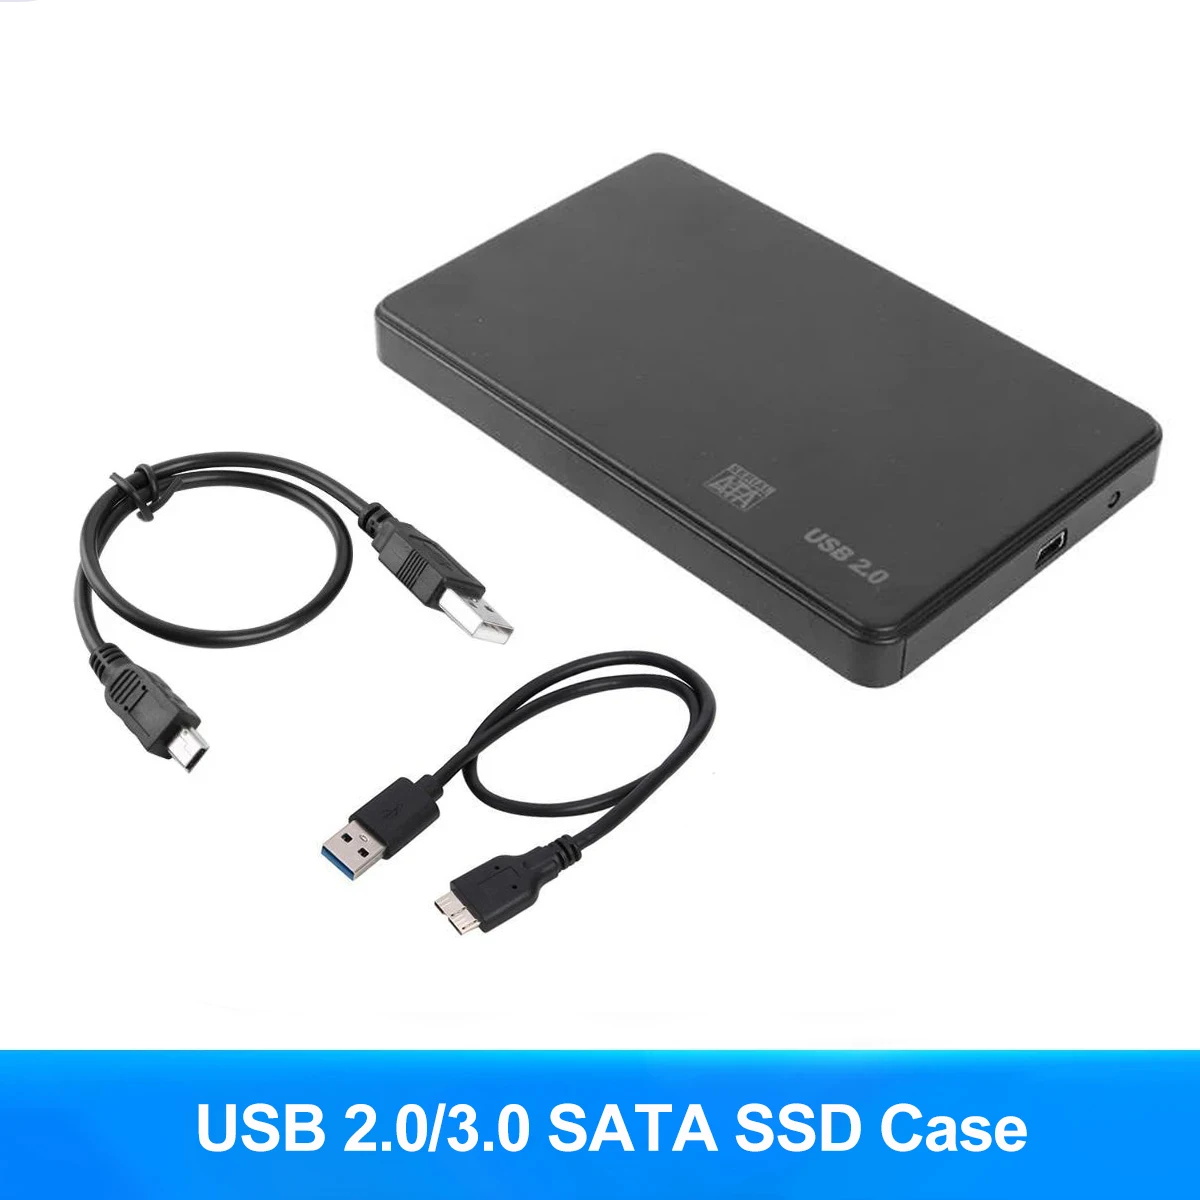 

SSD Case 2.5inch hdd case SSD Enclosure Sata to USB 3.0 2.0 Adapter 6Gbps Hard Drive Box Support 2TB HDD Disk For Windows Mac OS